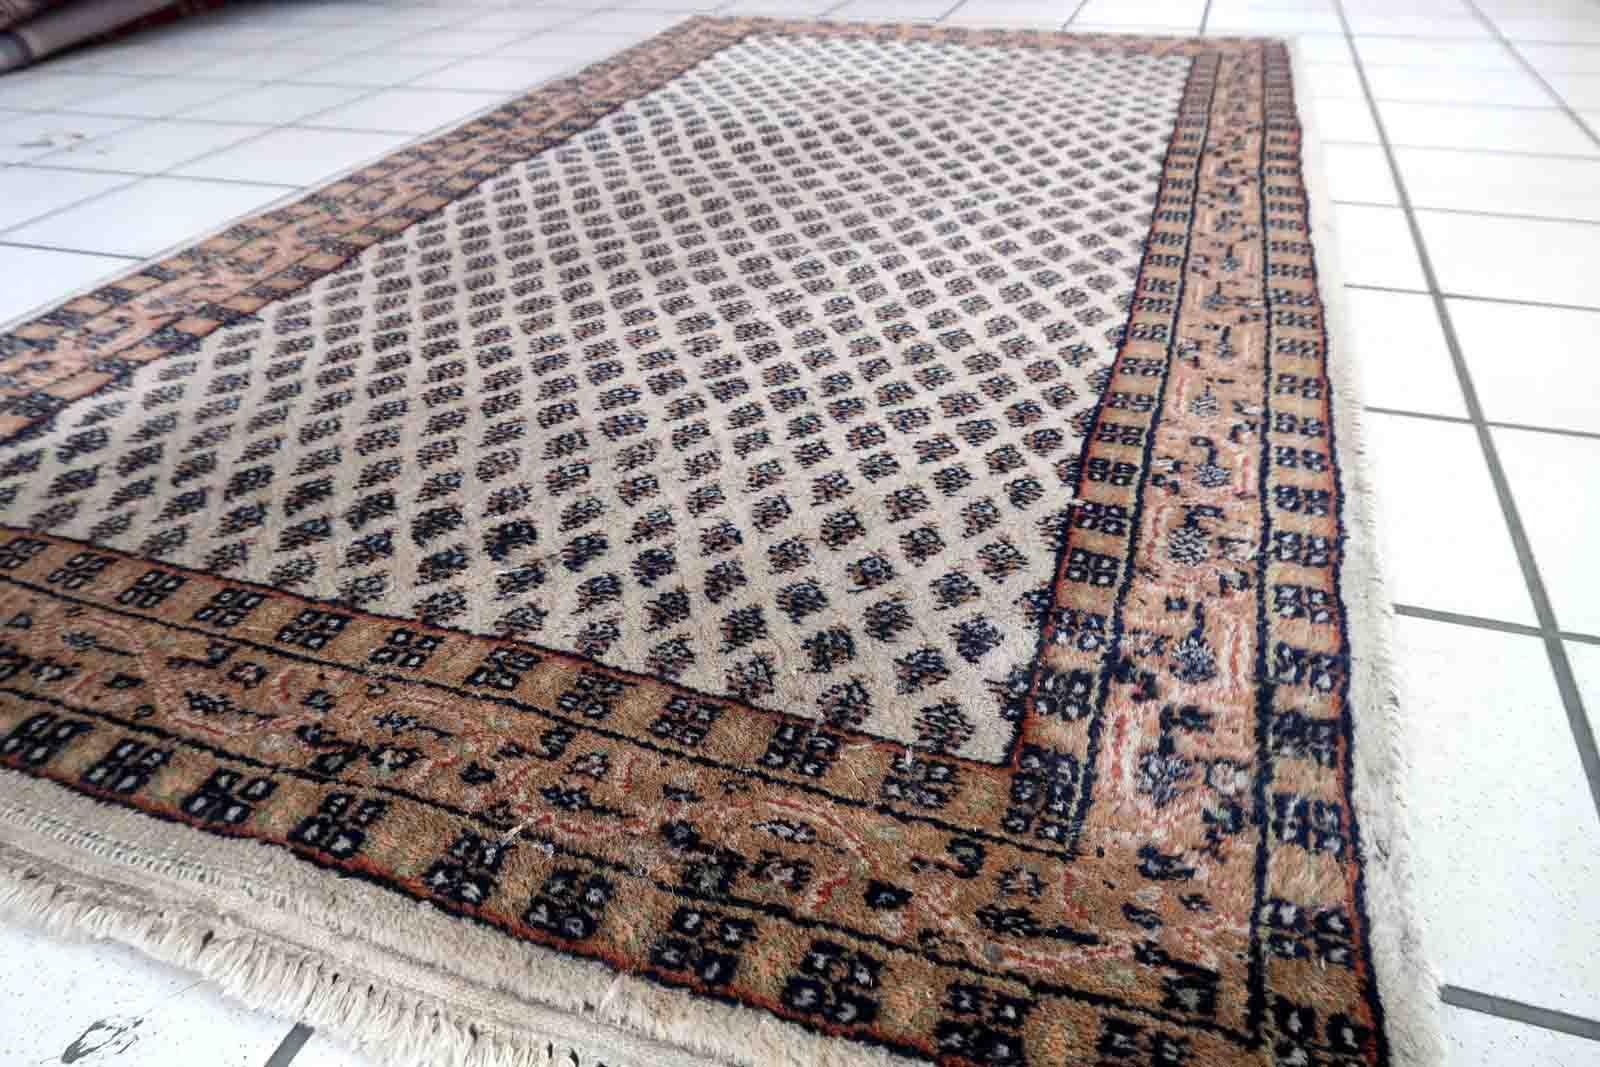 Handmade vintage Indian Seraband rug in original good condition. The rug has been made in traditional pattern, it is from circa1970s. 

-condition: original good,

-circa: 1970s,

-size: 2.9' x 5.2' (89cm x 160cm),

-material: